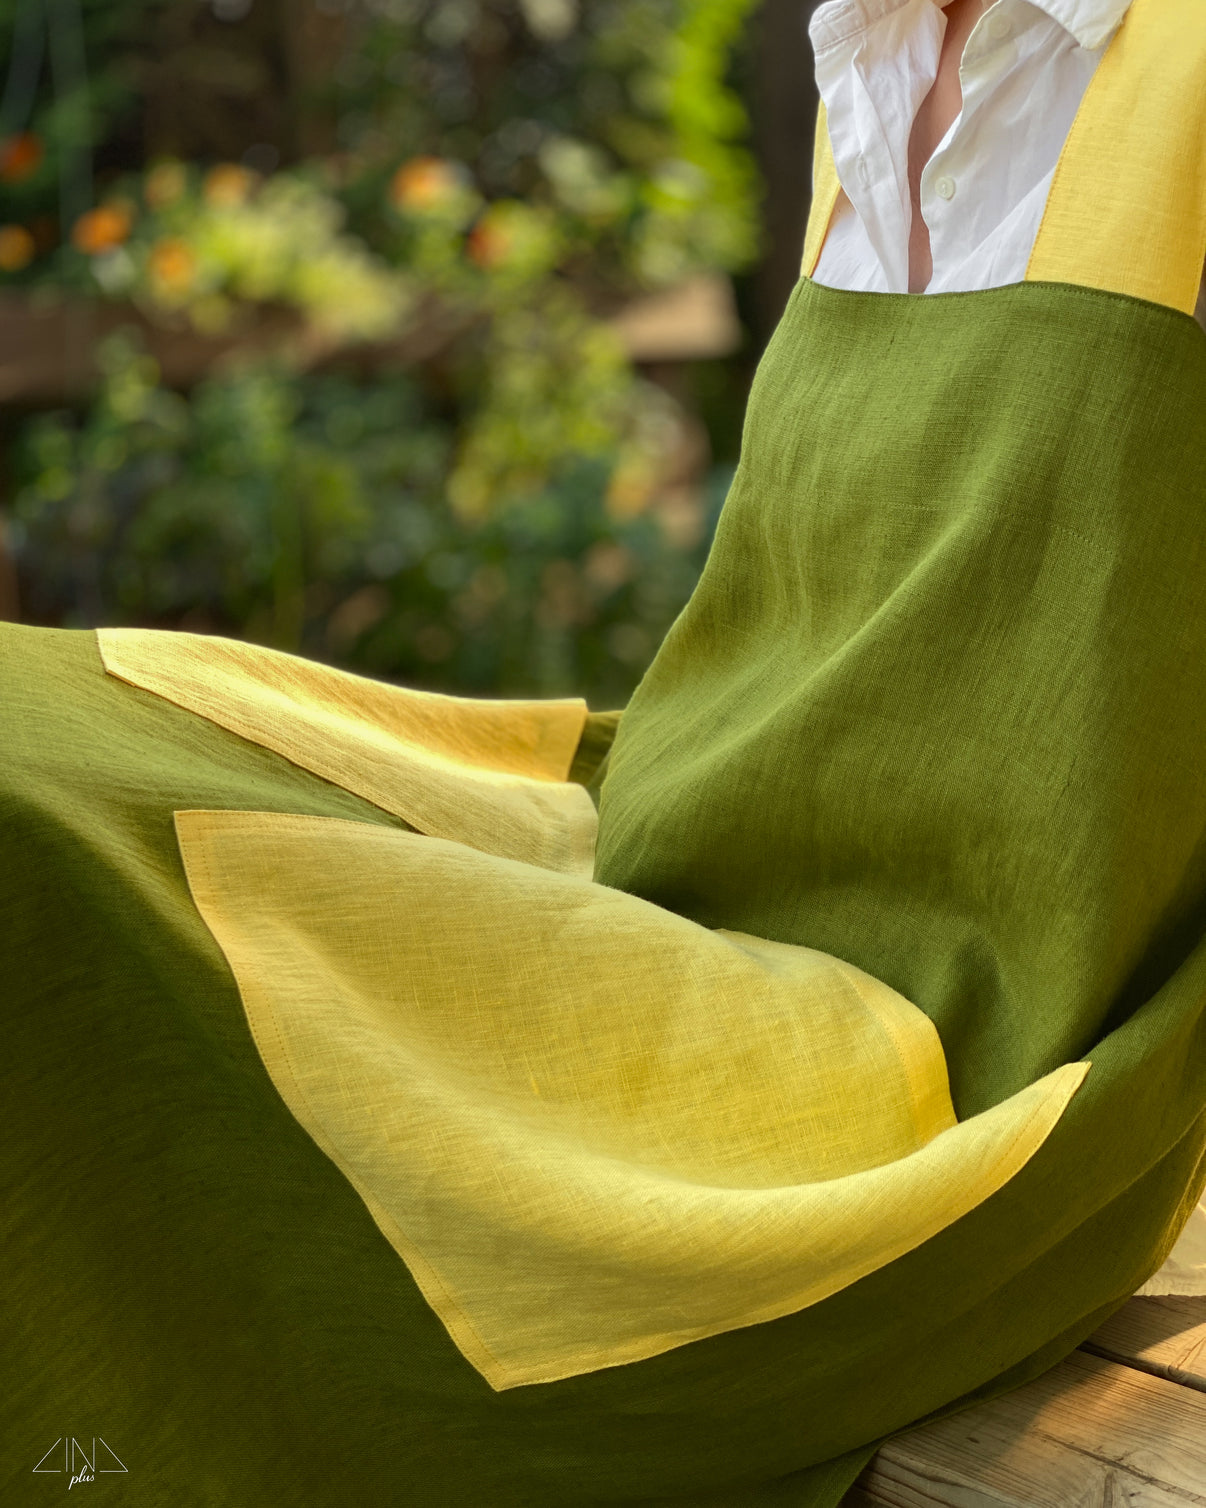 Bicolor Linen Pinafore Apron in Moss Green with Yellow Pockets and Straps for gardening